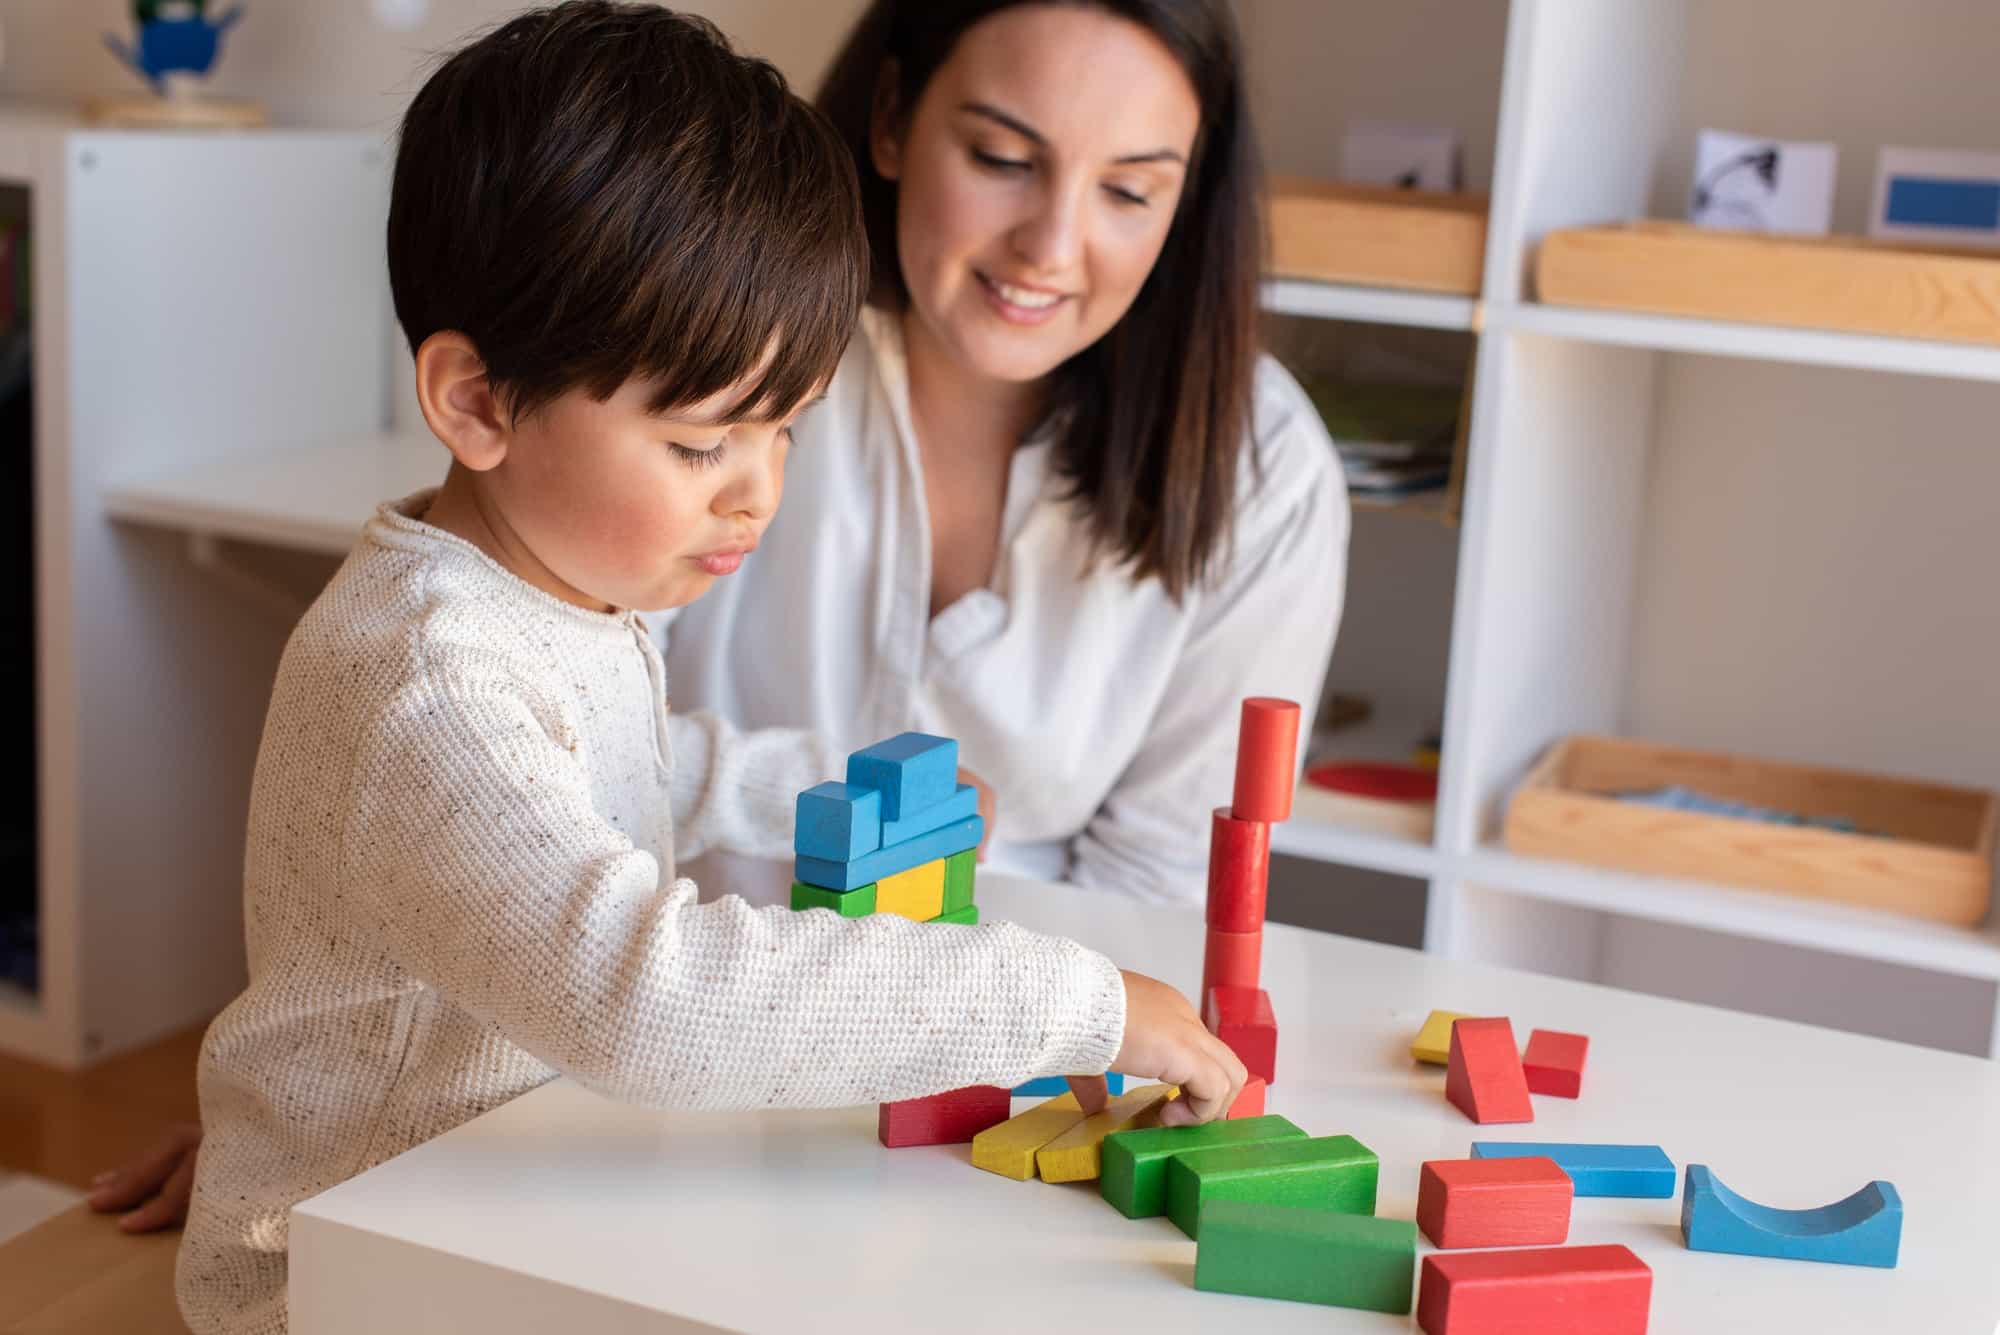 a person and a child playing with building blocks